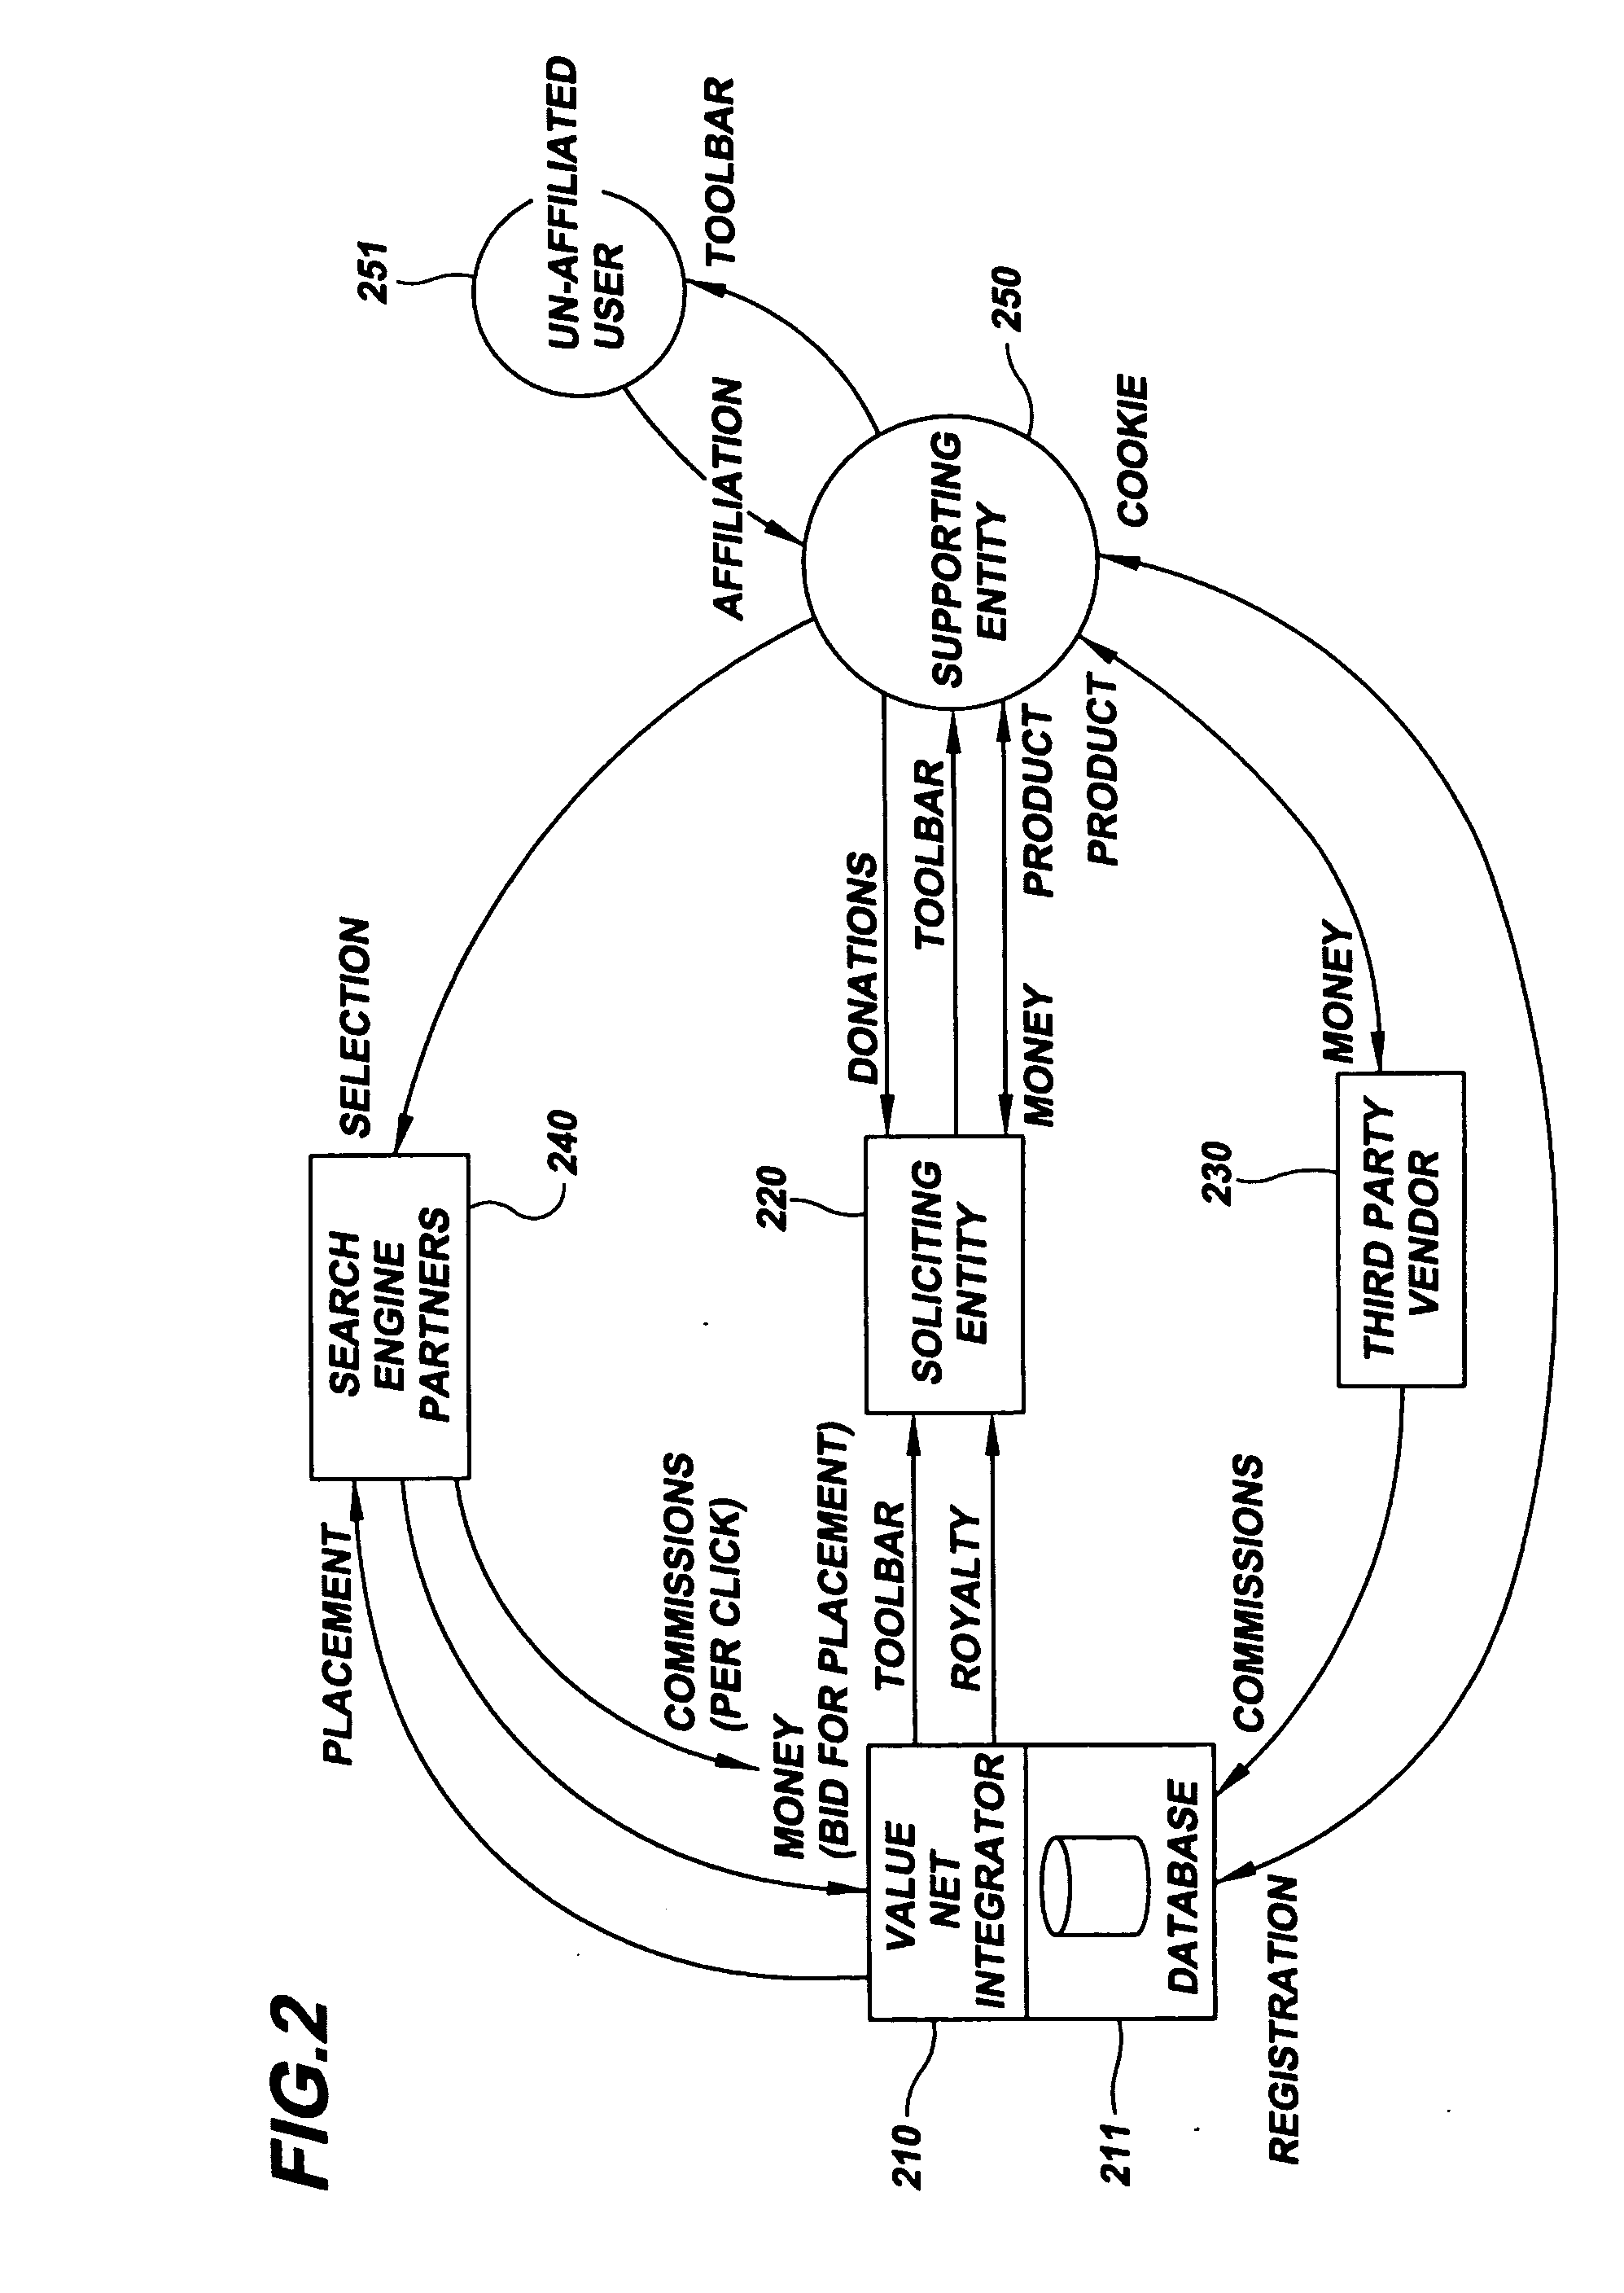 System and method for charitable donations